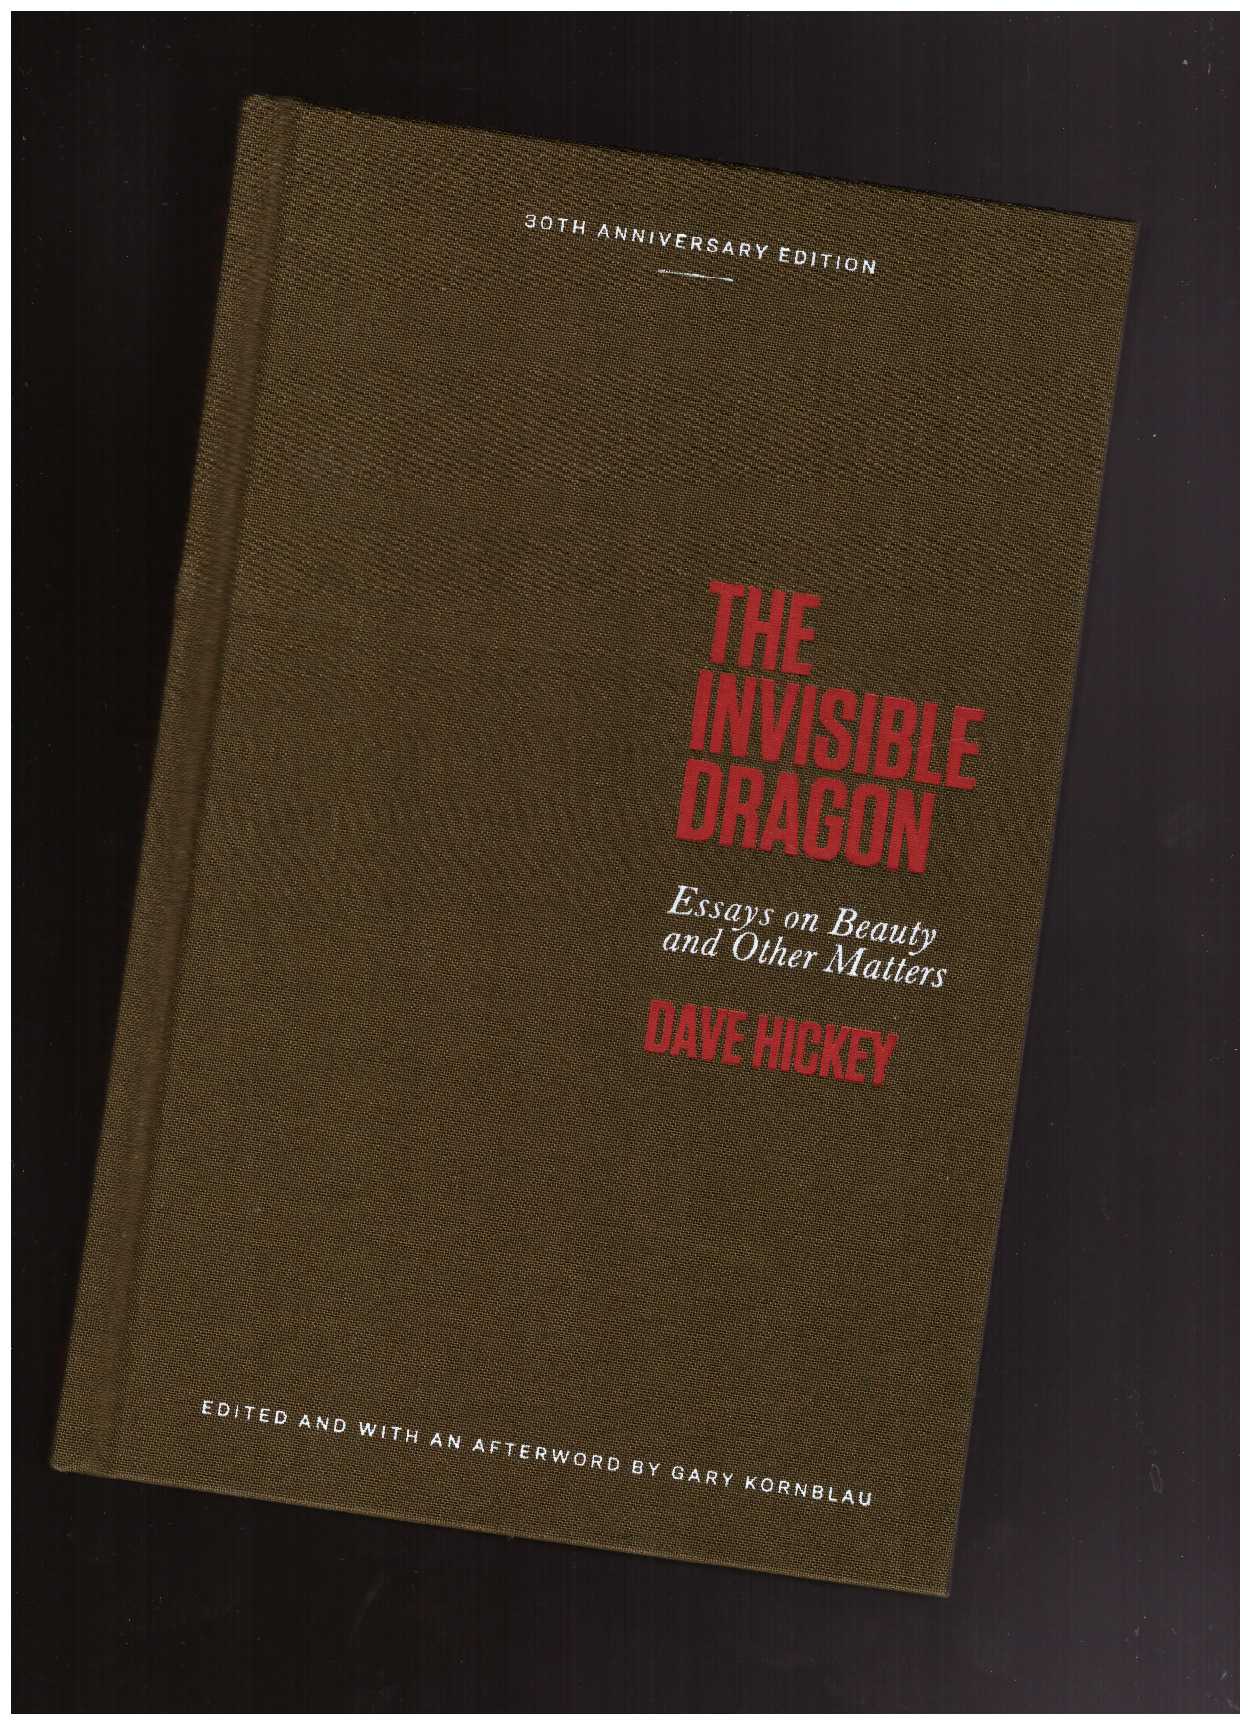 HICKEY, Dave - The Invisible Dragon: Essays on Beauty and Other Matters